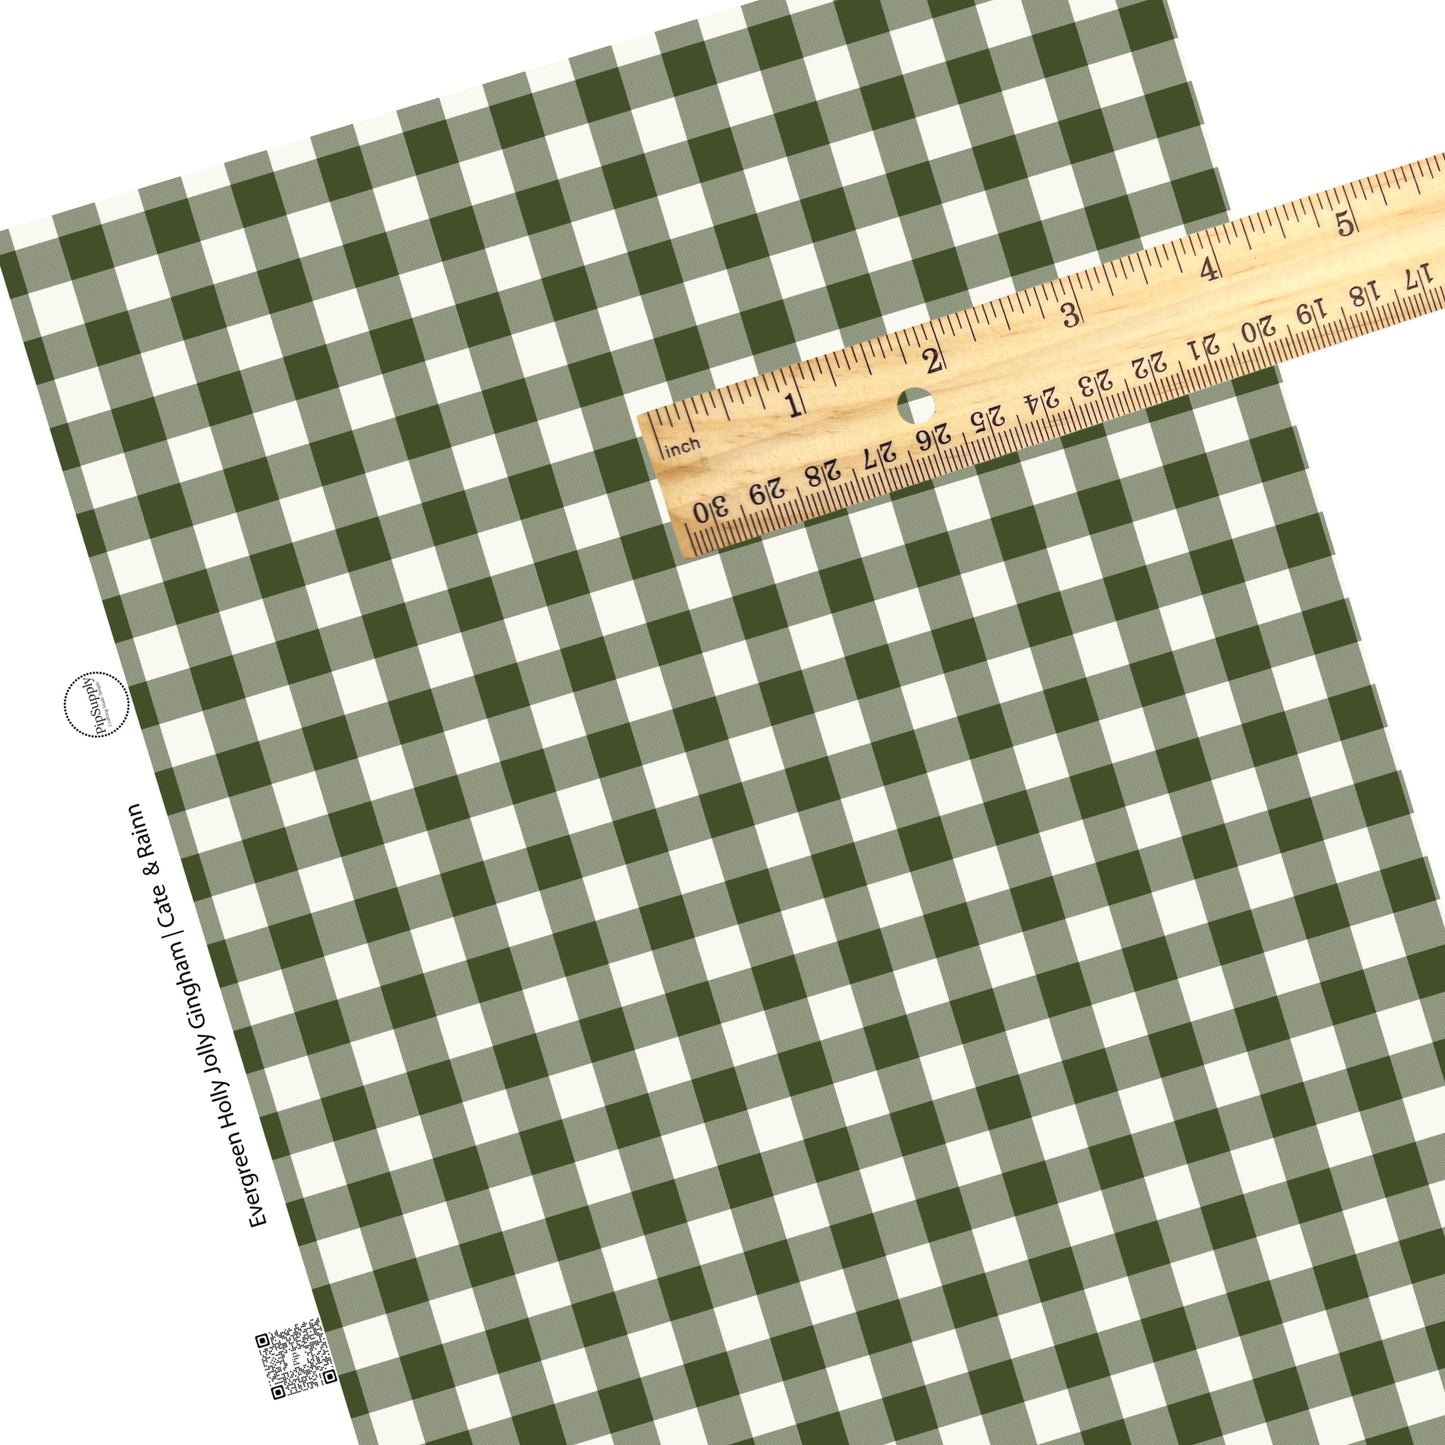 Green tiles on white checkered faux leather sheets